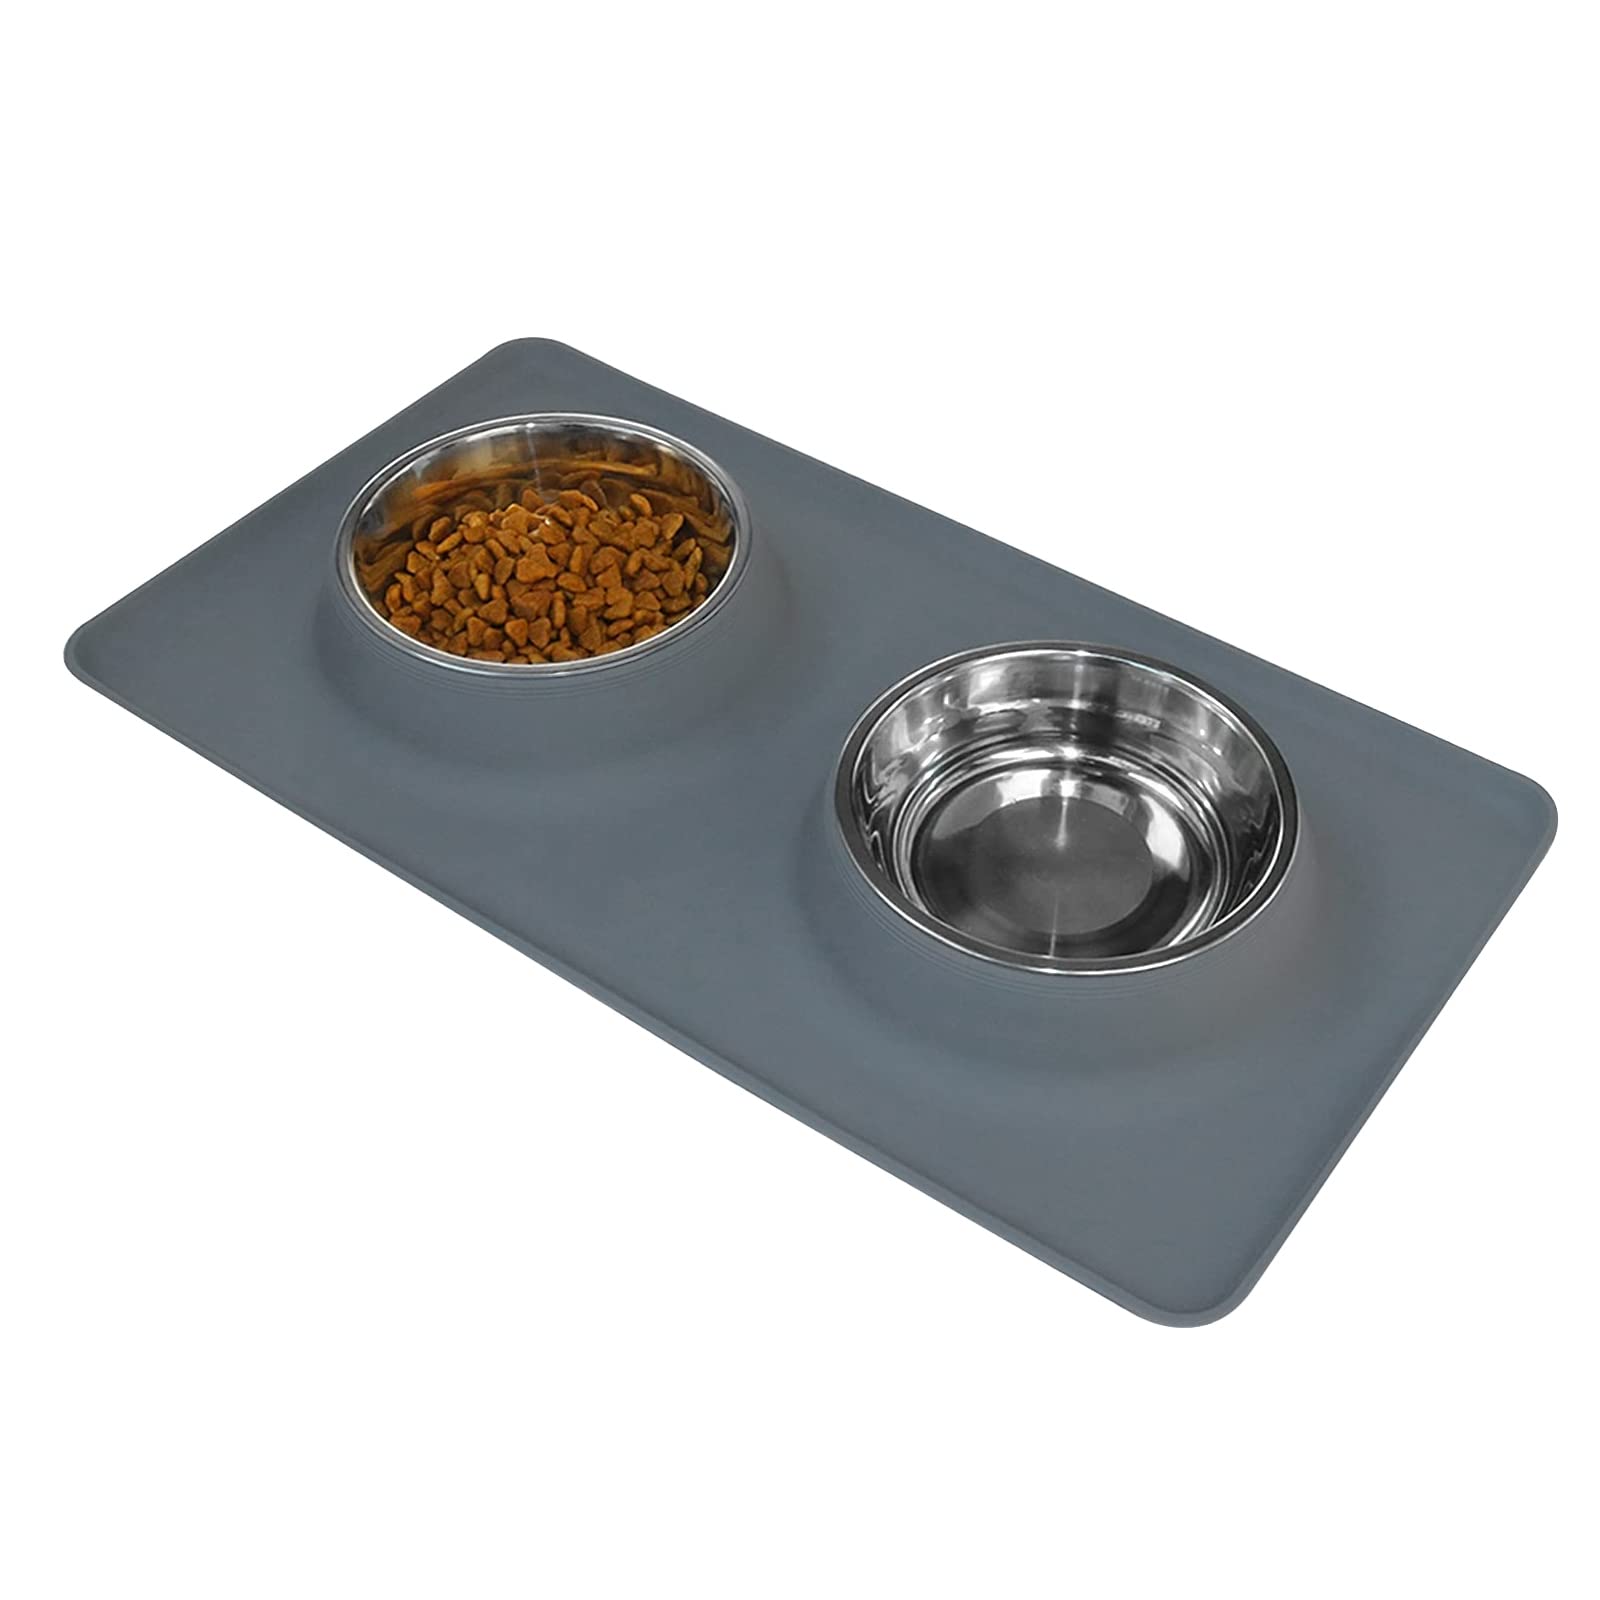 Nepfaivy Dog Bowls, Cat Food And Water Bowls Stainless Steel